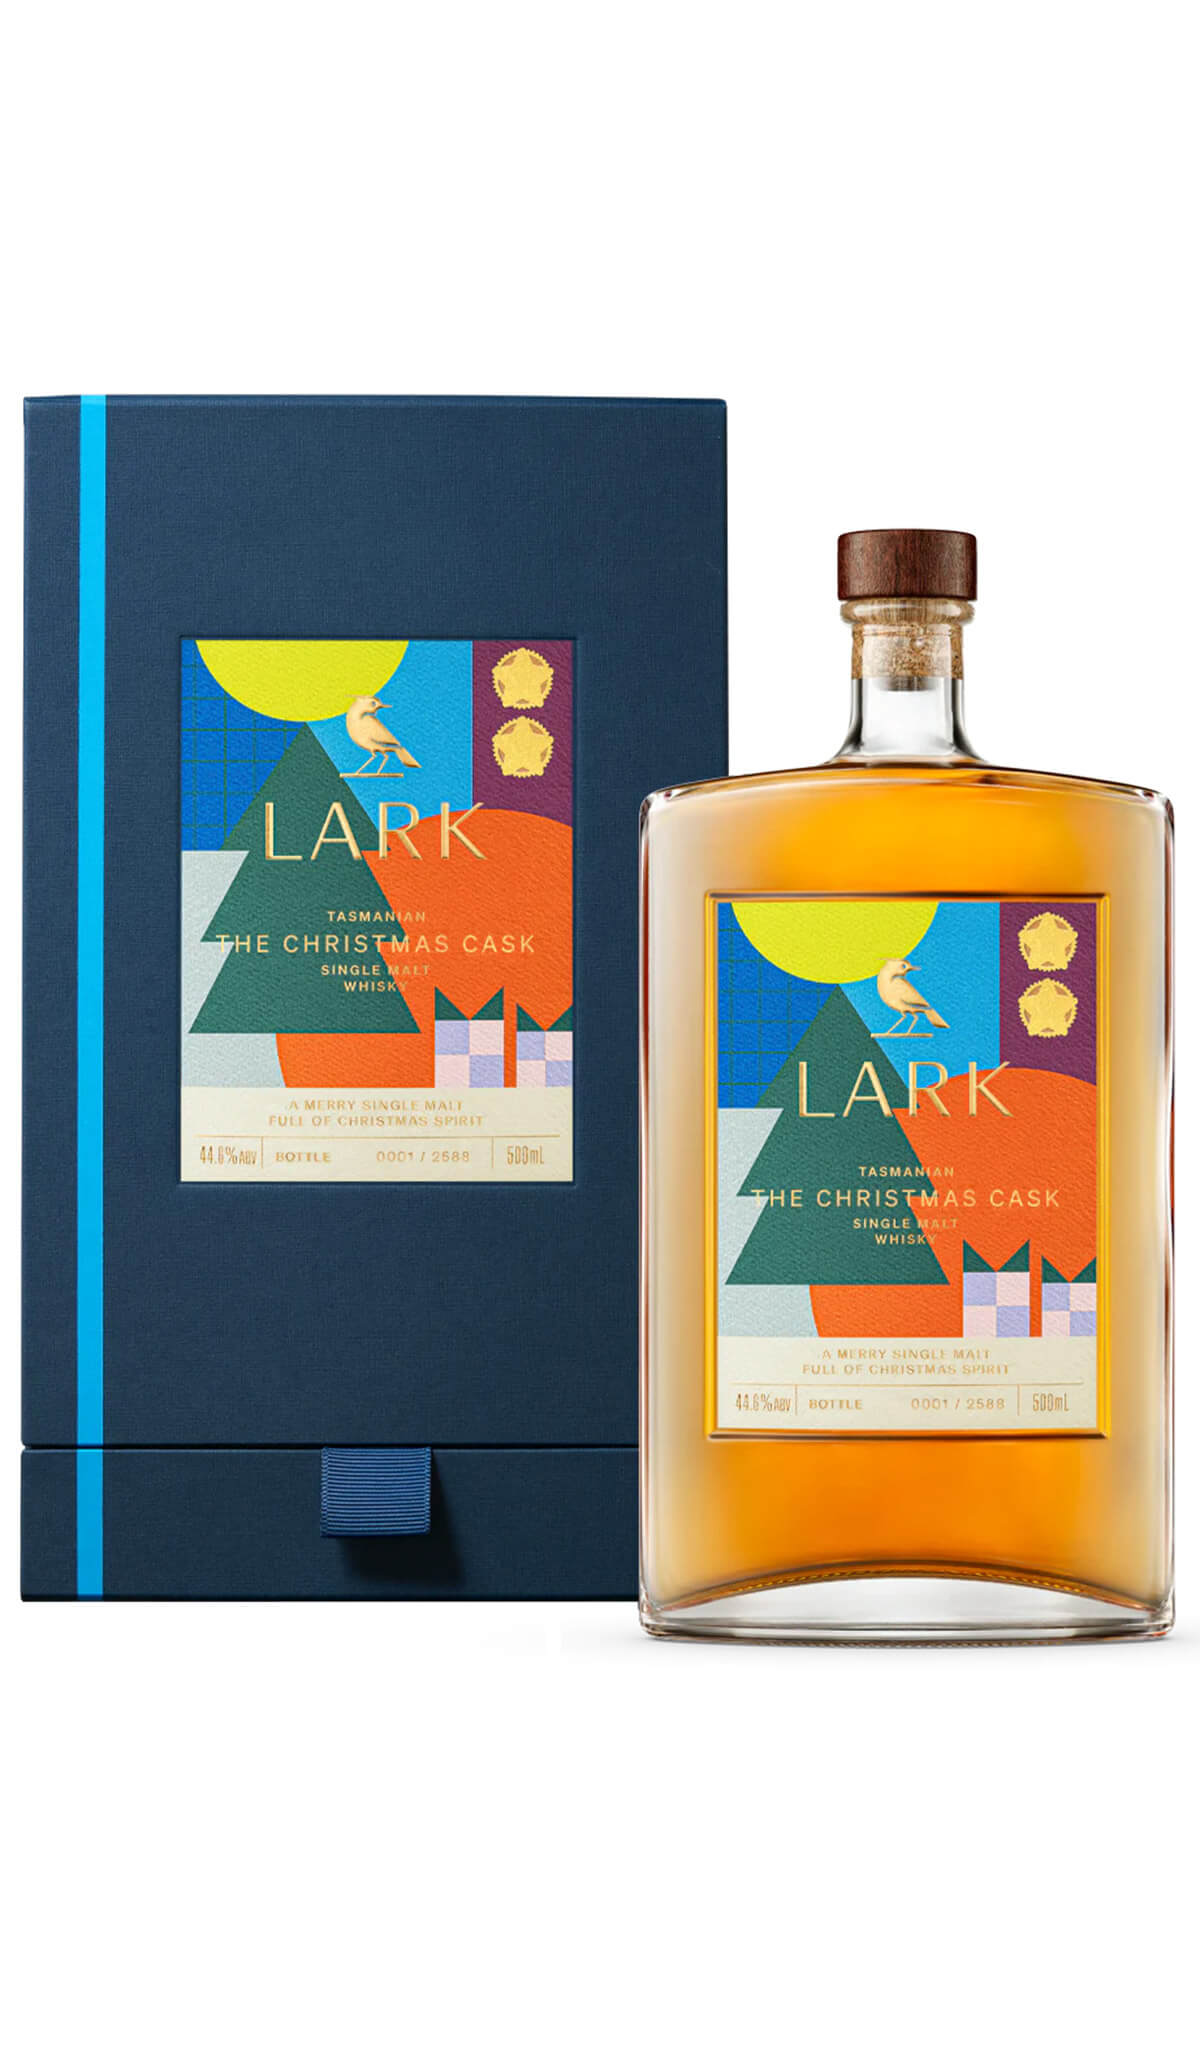 Find out more, explore the range and purchase Lark The Christmas Cask Single Malt Whisky 500ml (Tasmania) available online at Wine Sellers Direct - Australia's independent liquor specialists.